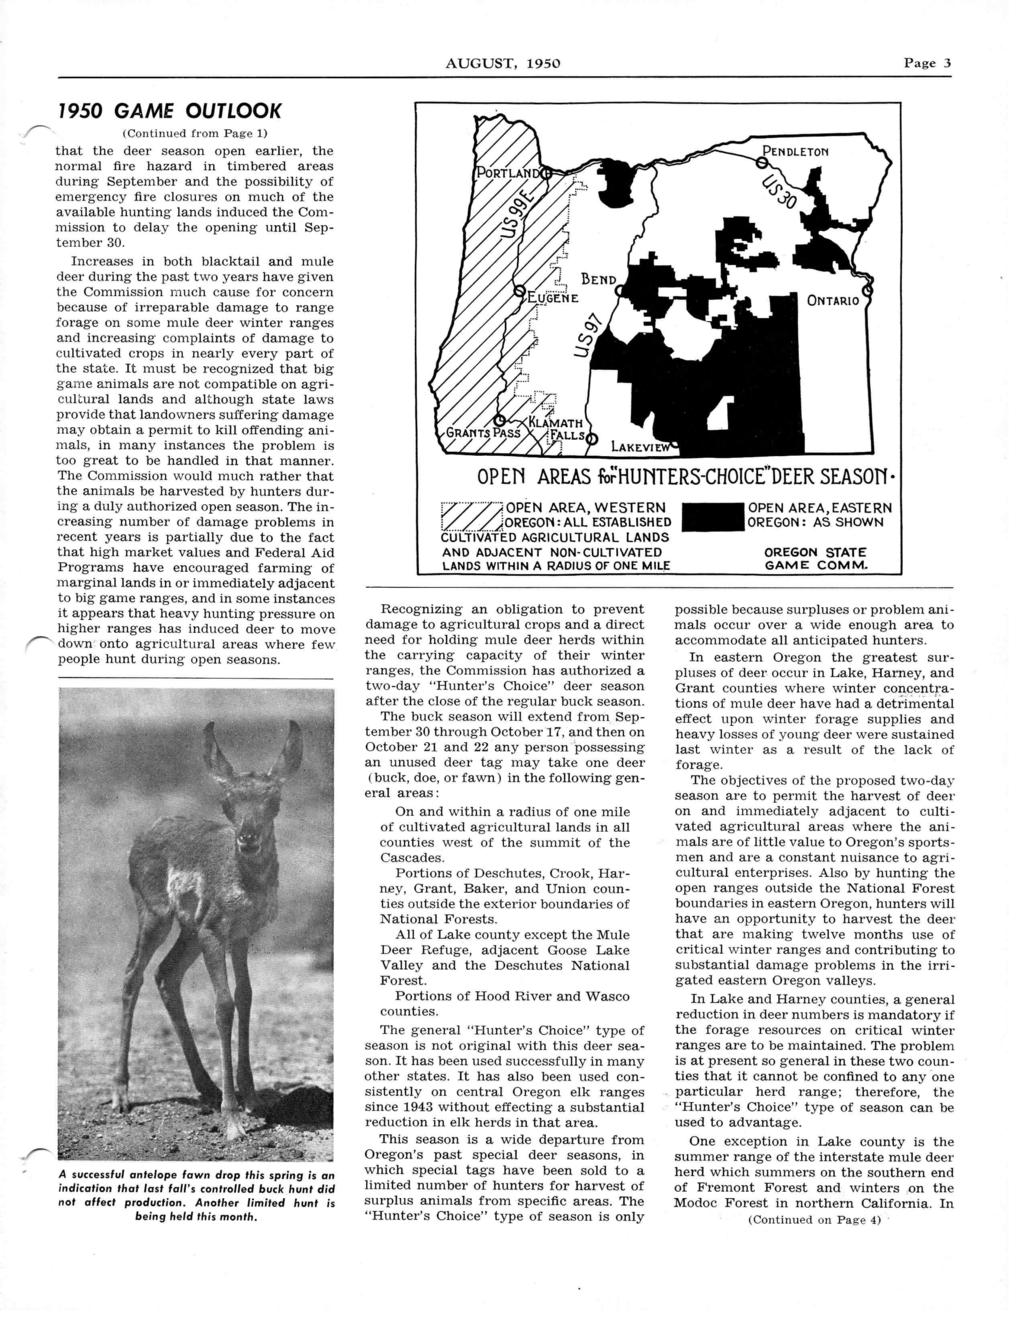 AUGUST, 1950 Page 3 7950 GAME OUTLOOK (Continued from Page 1) that the deer season open earlier, the normal fire hazard in timbered areas during September and the possibility of emergency fire